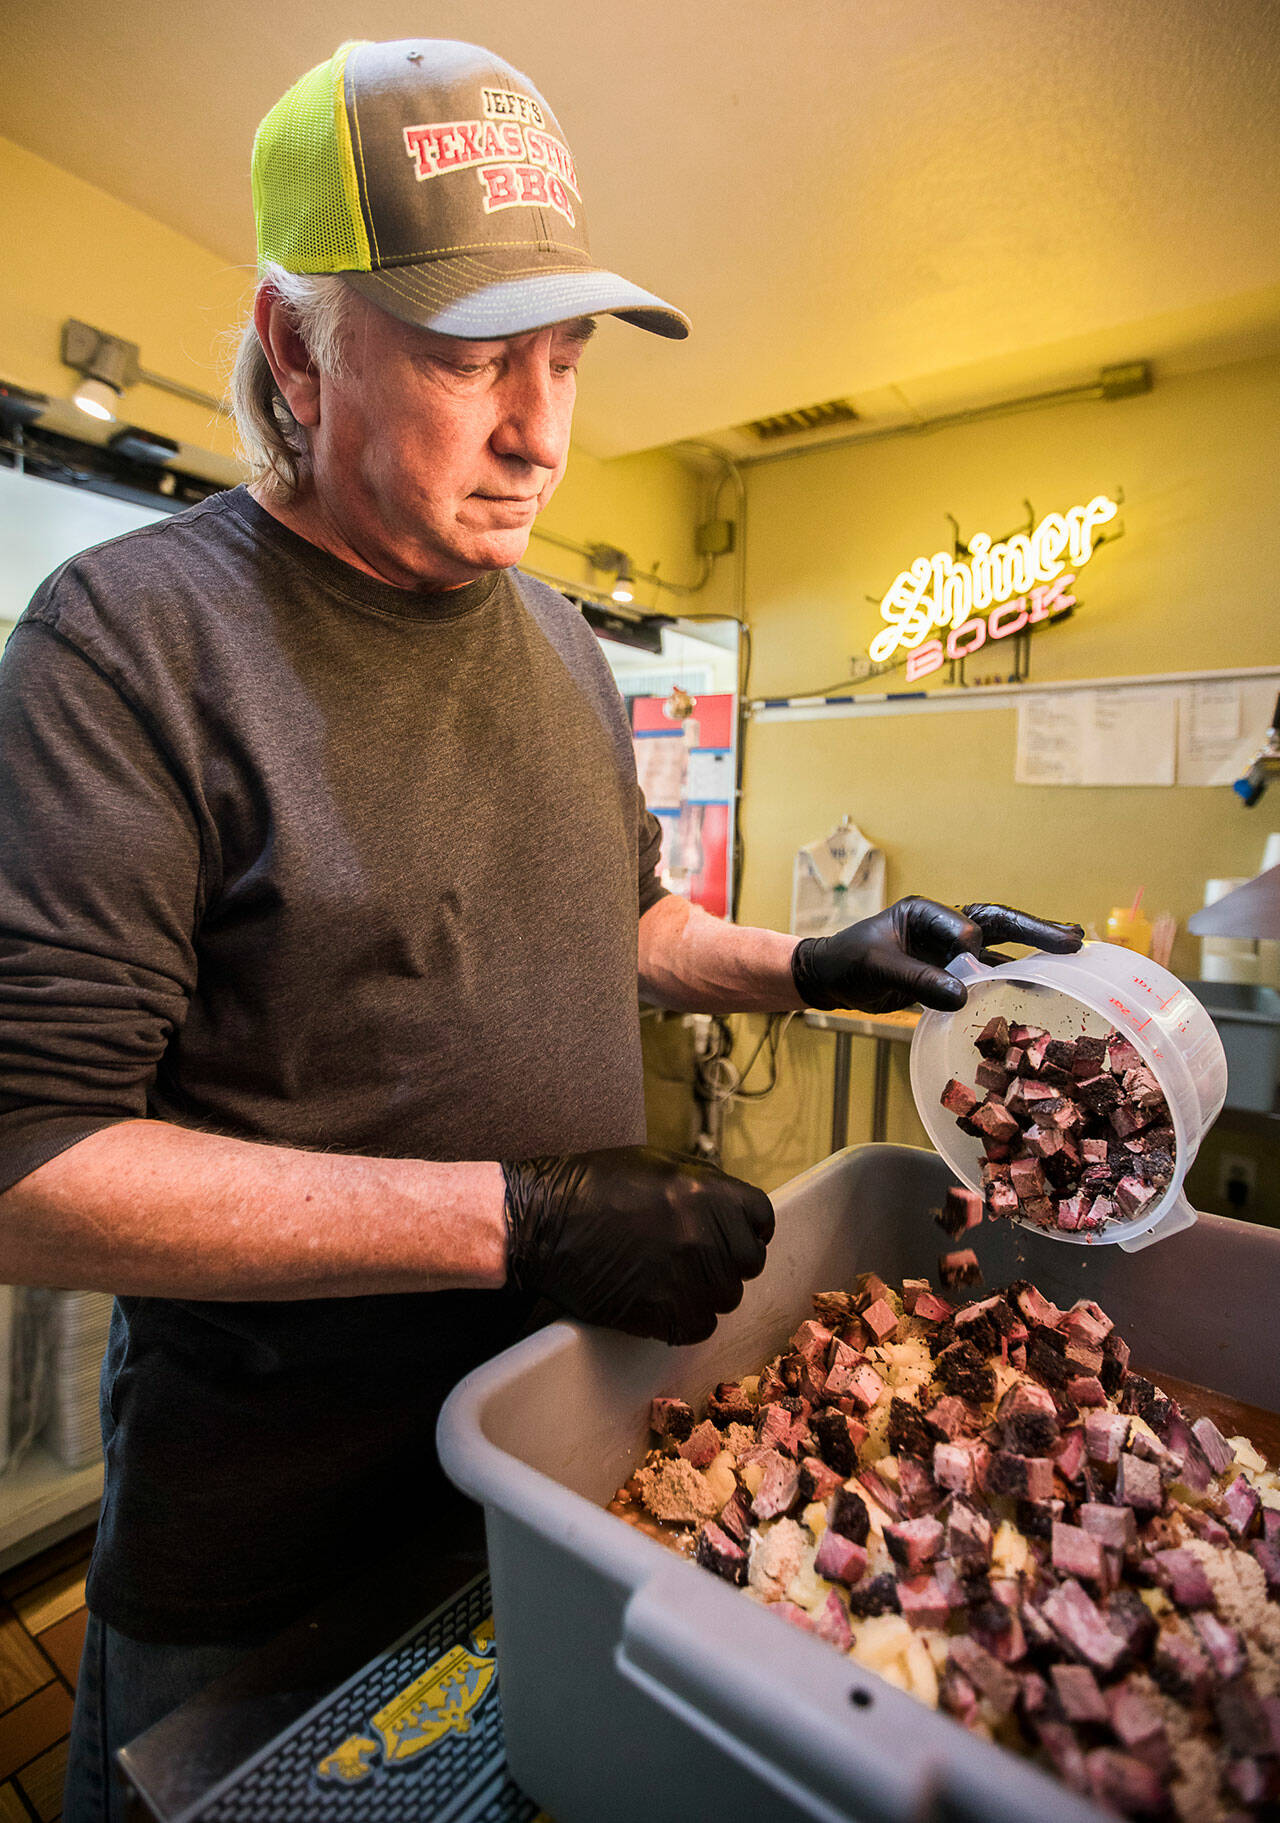 Jeff Knoch, owner of Jeff’s Texas Style BBQ, pours brisket into his signature brisket baked beans on Jan. 13, in Marysville. (Olivia Vanni / The Herald)